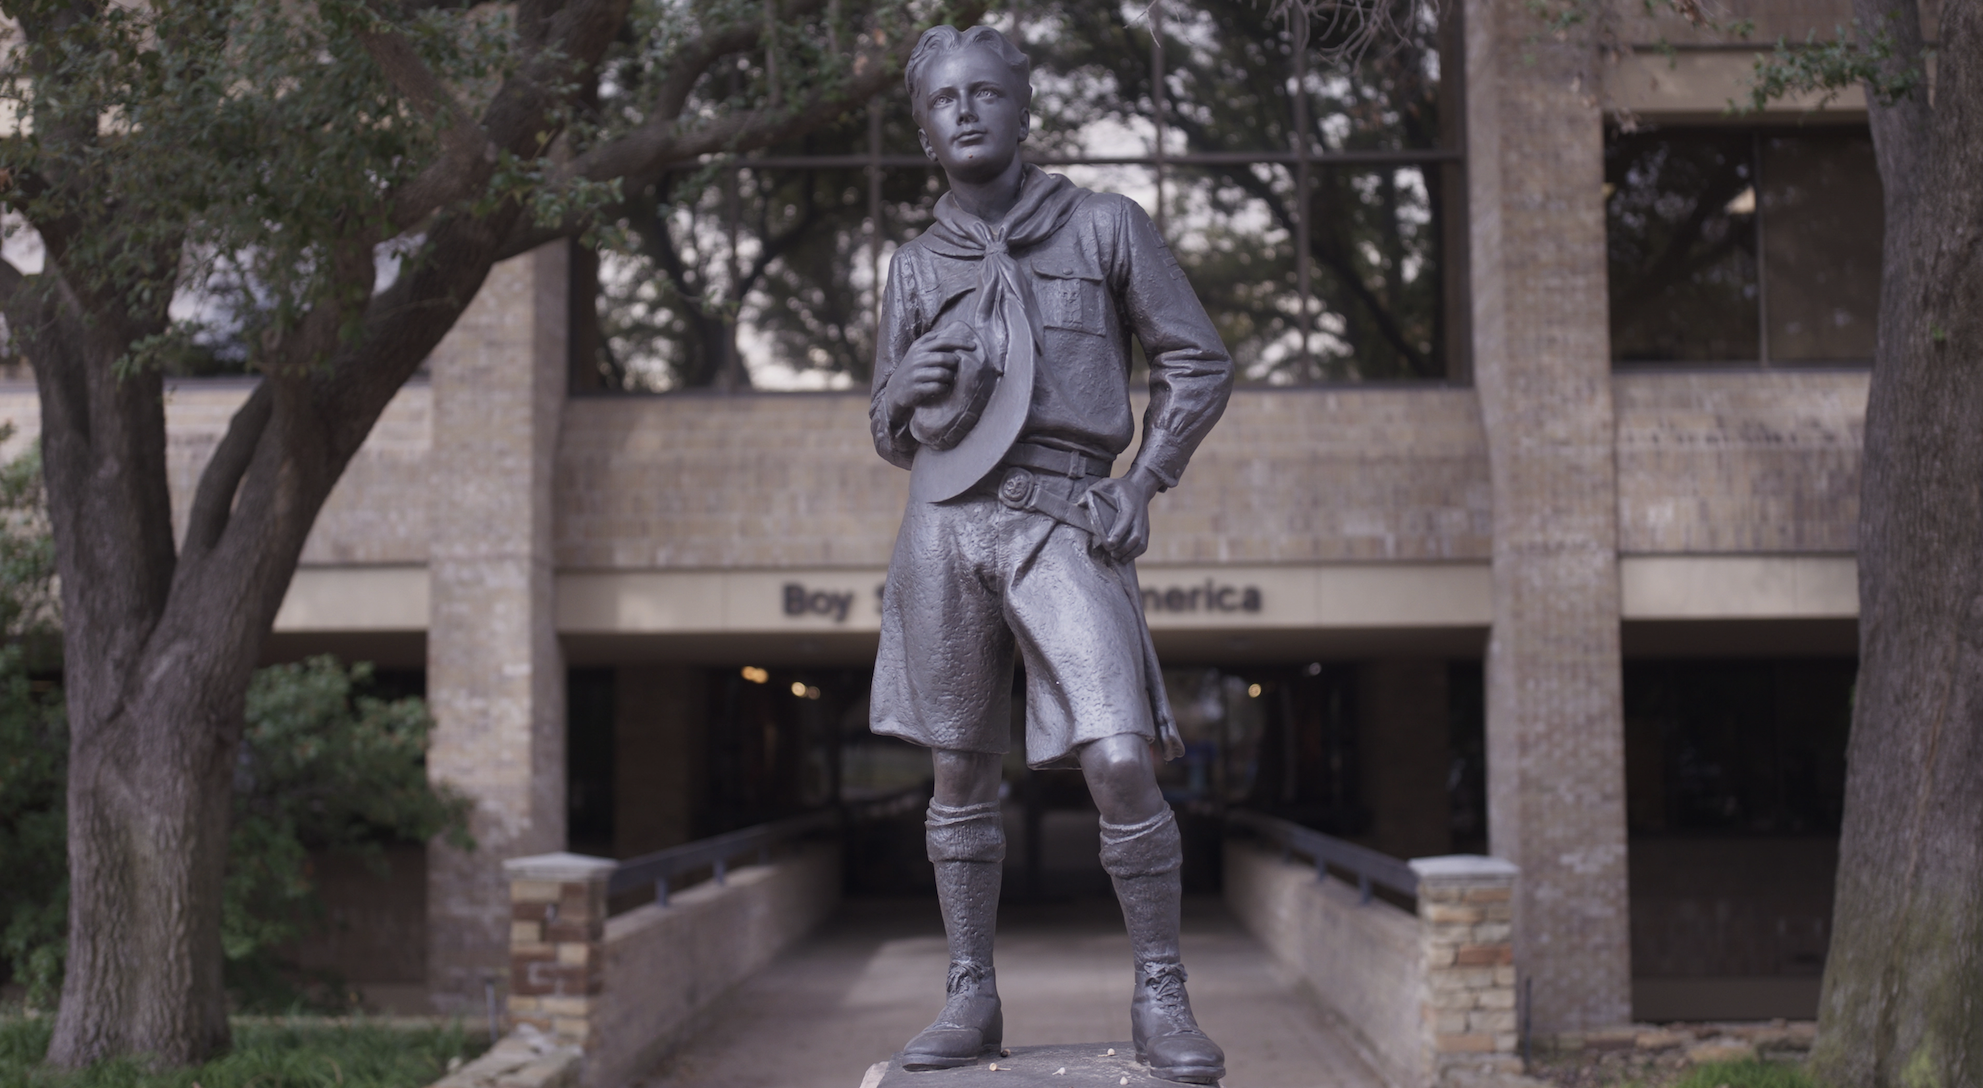 The Boy Scout statue outside of Boy Scout headquarters